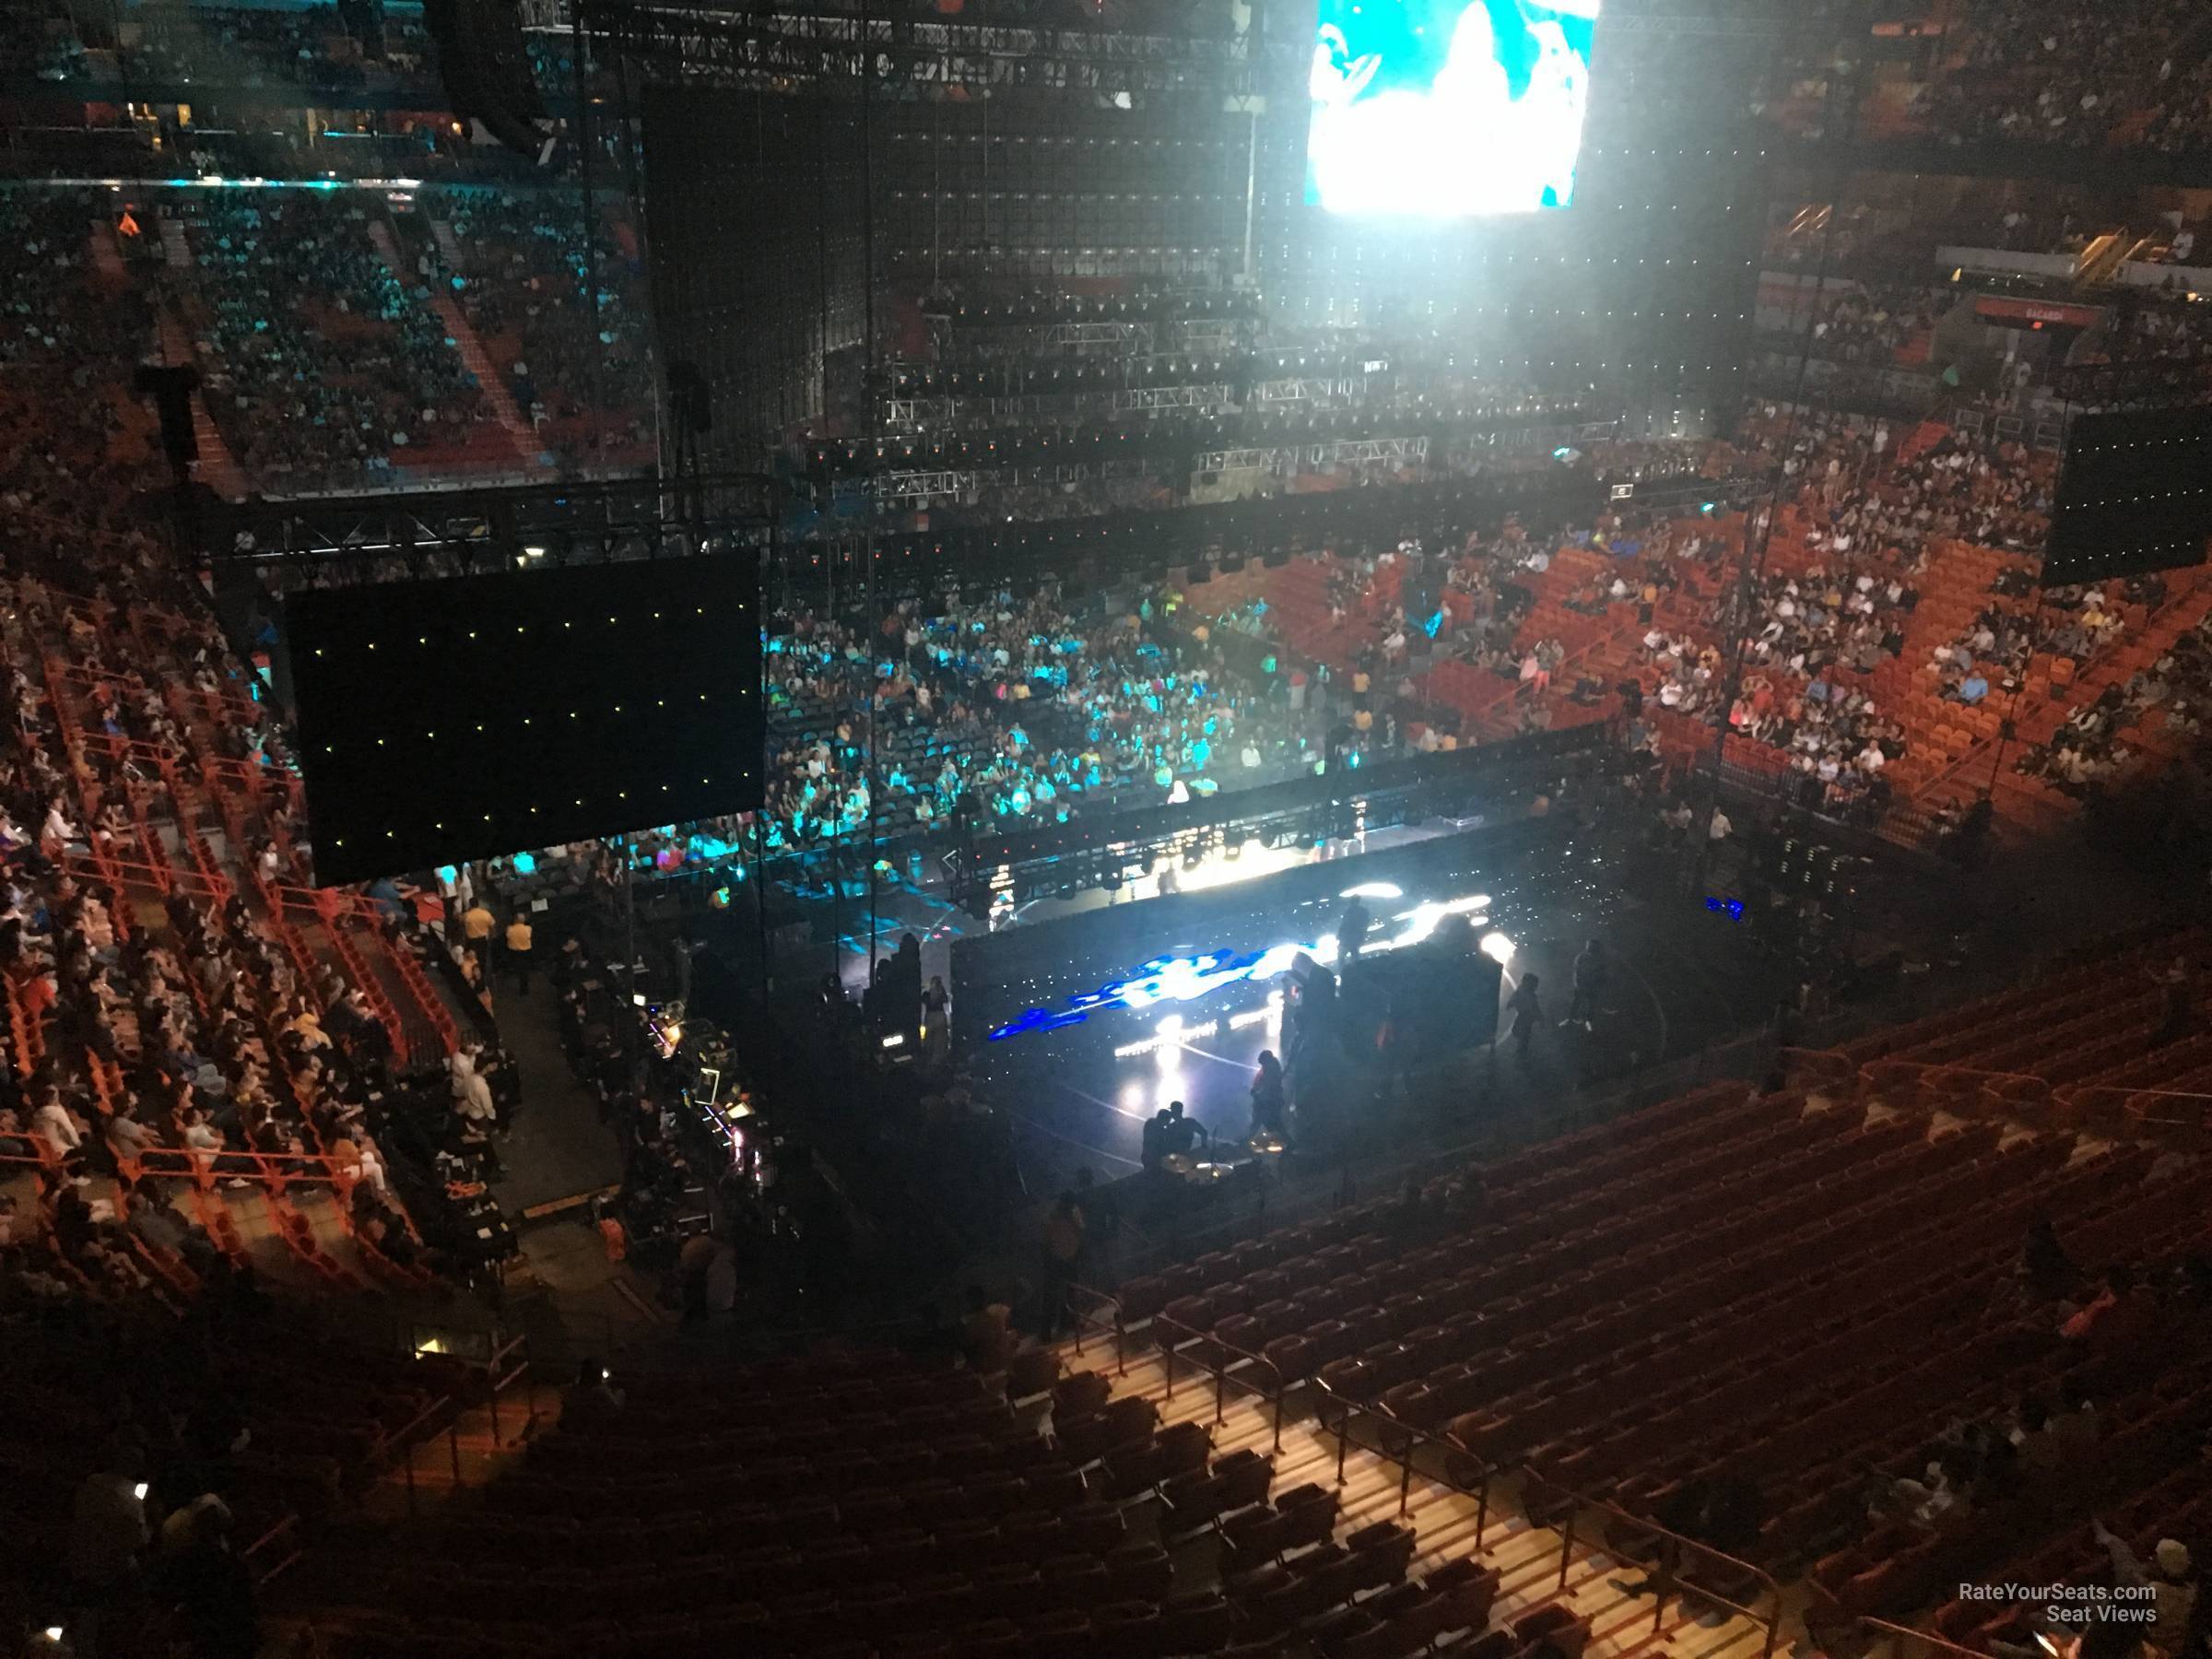 section 303, row 3 seat view  for concert - ftx arena